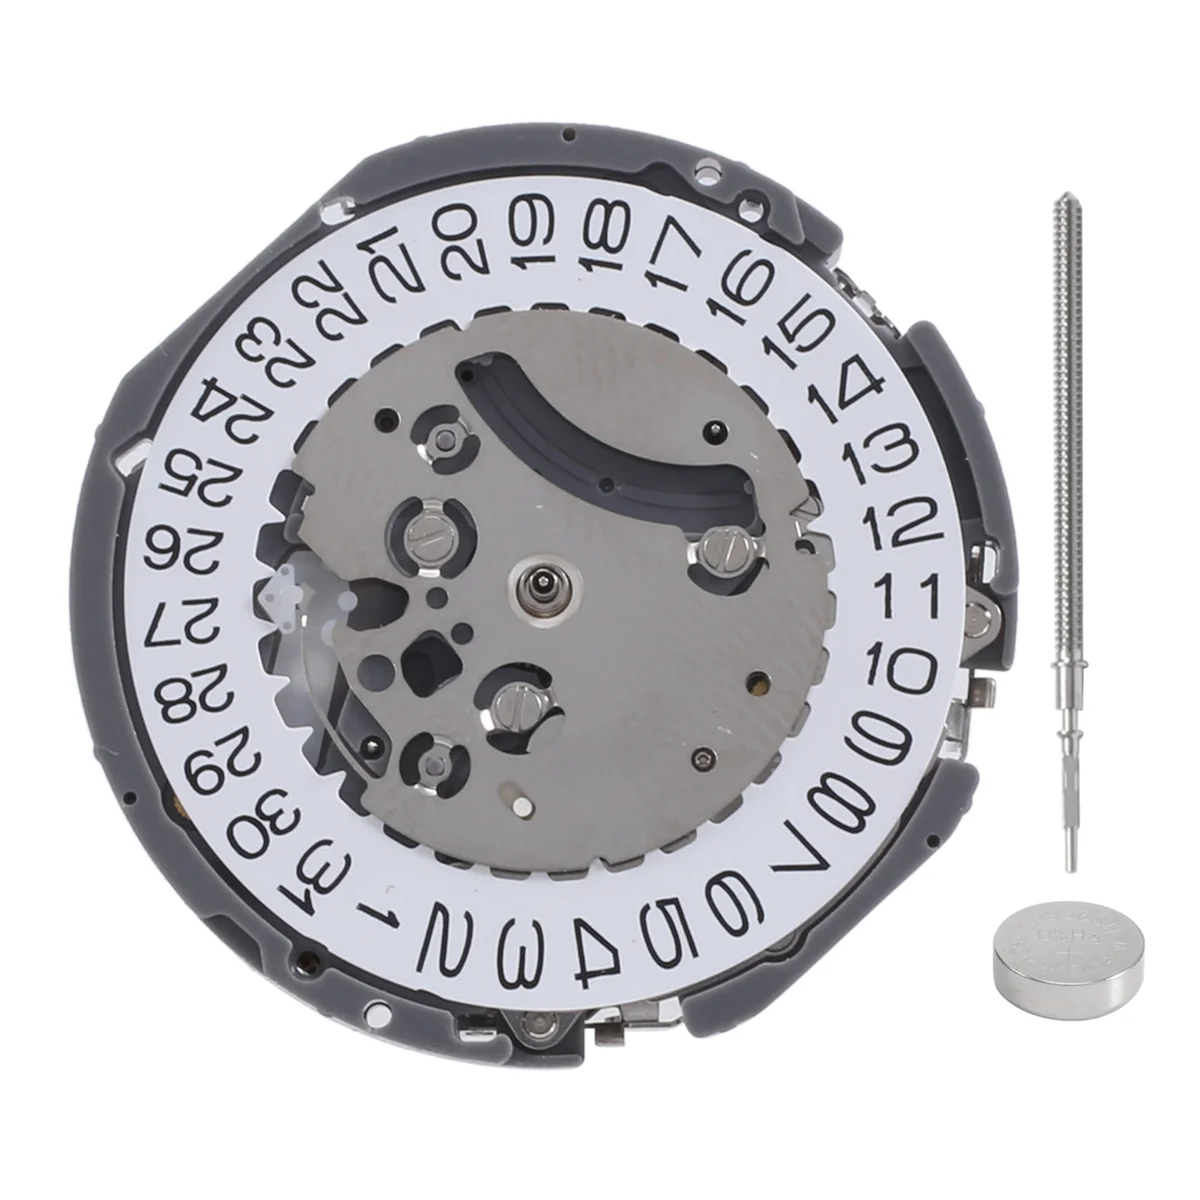 

Chronograph VK61A Quartz Watch Movement Minute Hand Date Display JAPAN Repair Spare Parts with Battery